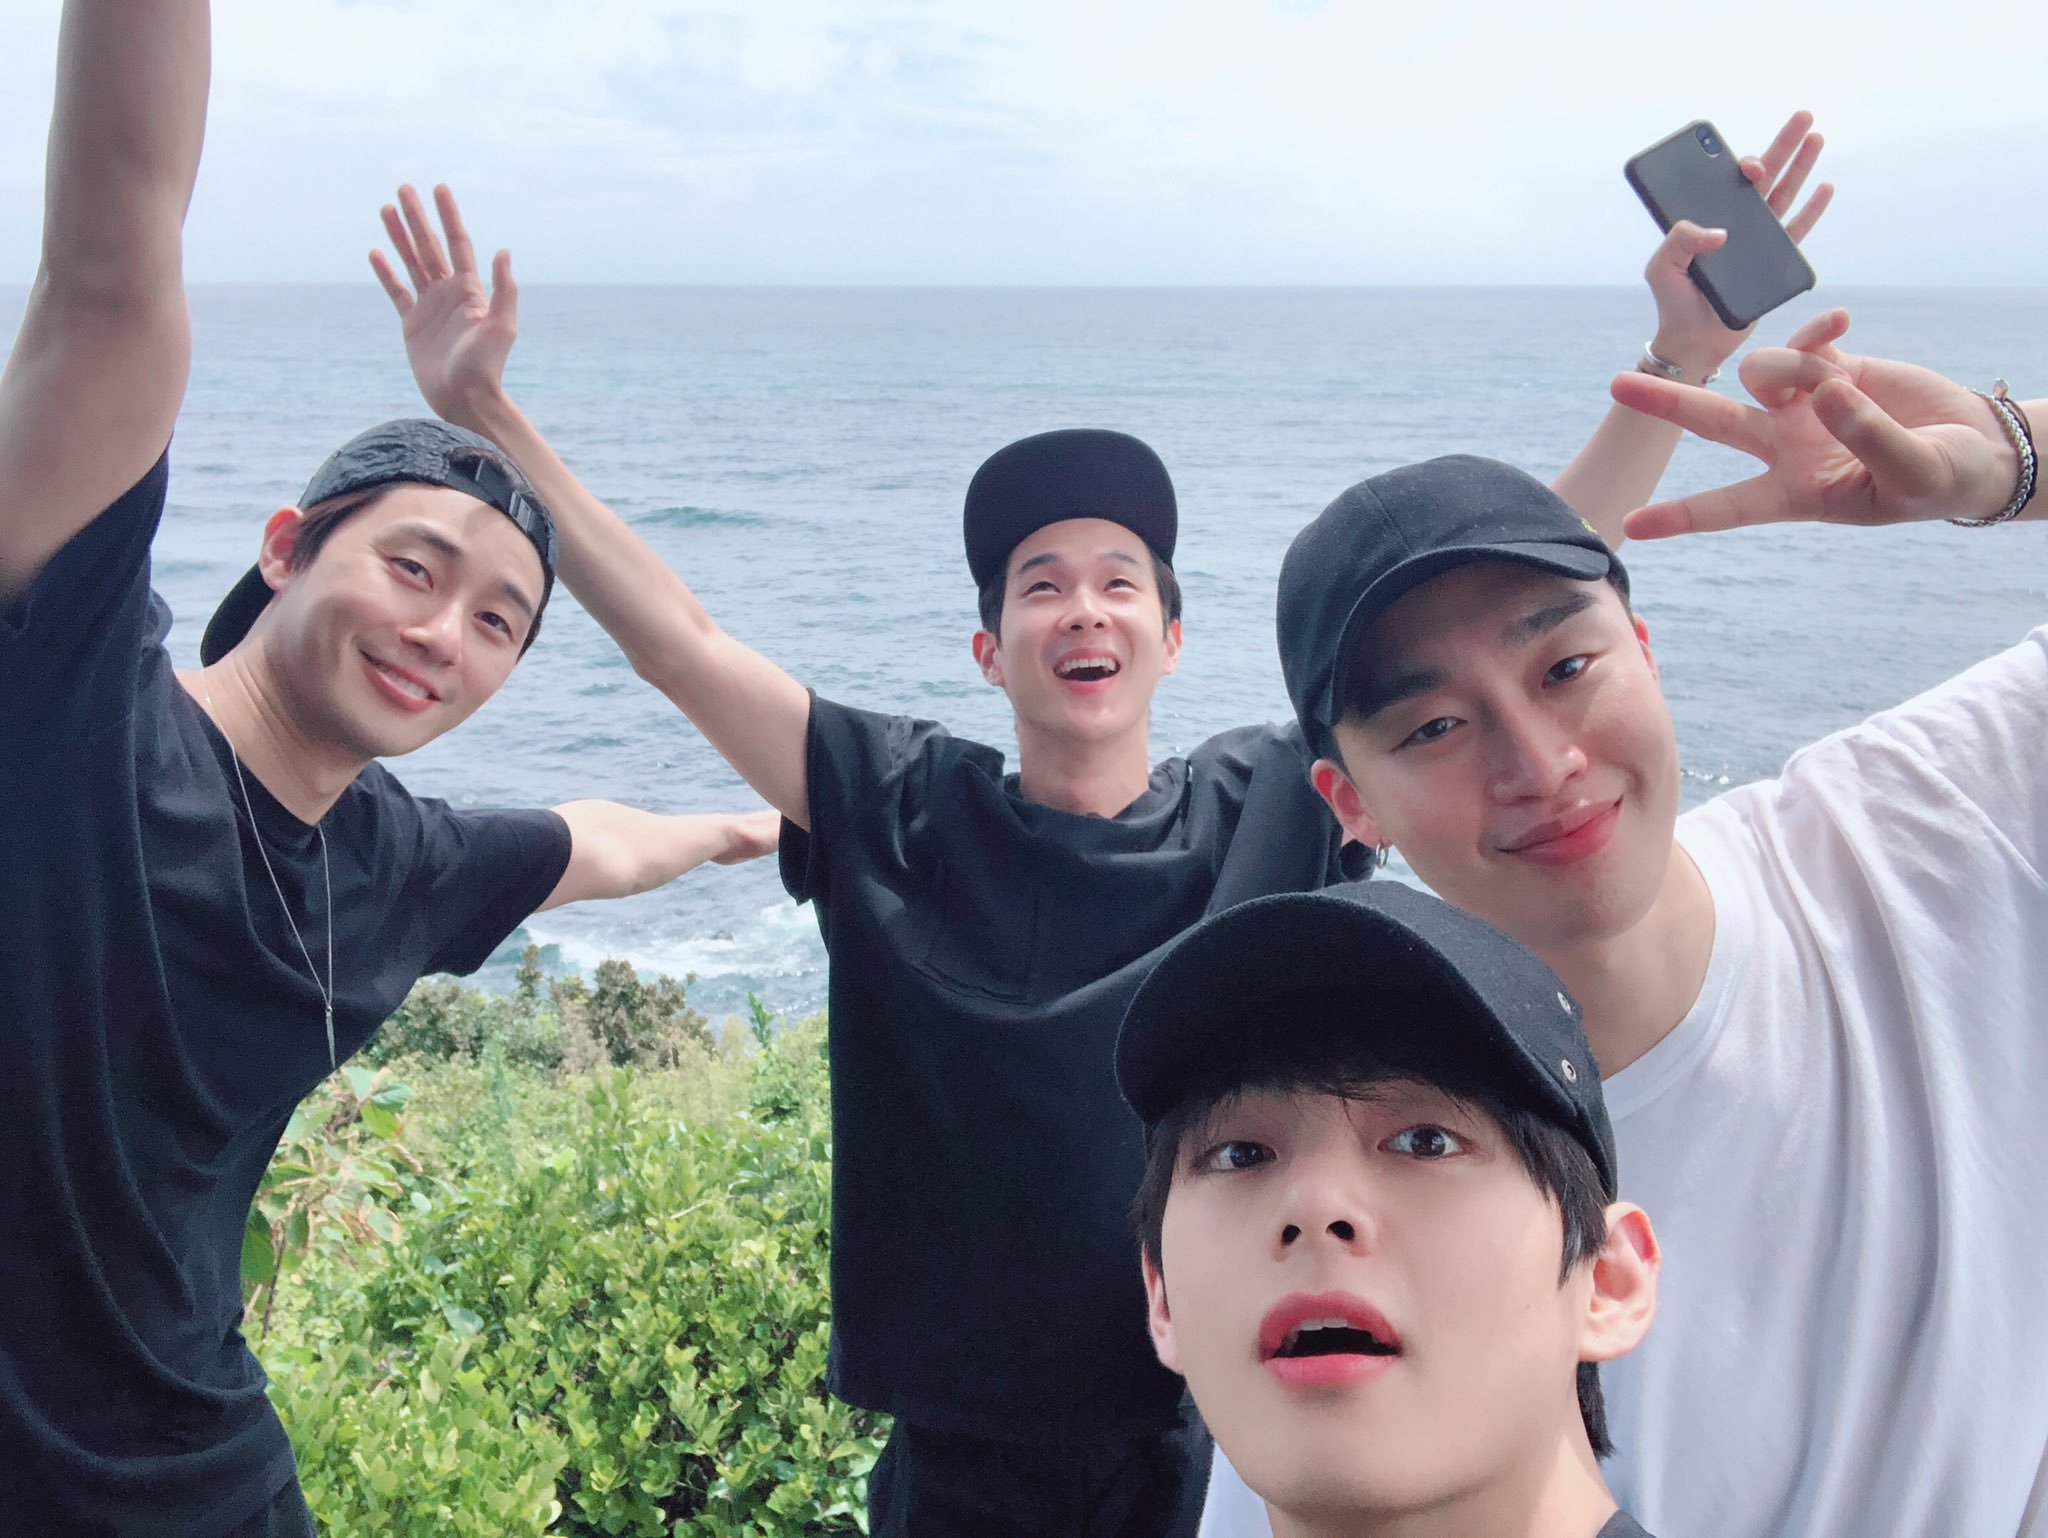 BTS V has been on vacation with actor Park Seo-joon and Choi Woo-shik singer The Resurrection of Pigboy Crabshaw.On the 29th, BTS official SNS posted a photo of V with Park Seo-joon, Choi Woo-shik, and The Resurrection of Pigboy Crabshaw, along with Wooga.In the photo, V is in a happy friendship Travel with members of the entertainment group Ugauga Park Seo-joon, Choi Woo-shik, and The Resurrection of Pigboy Crabshaw (Park Hyung-seok is absent from military service) on a boat, eating meat, raising two arms on the beach and smiling broadly.BTS members are spending their time on long-term vacation for about two months.Photo = BTS Twitter